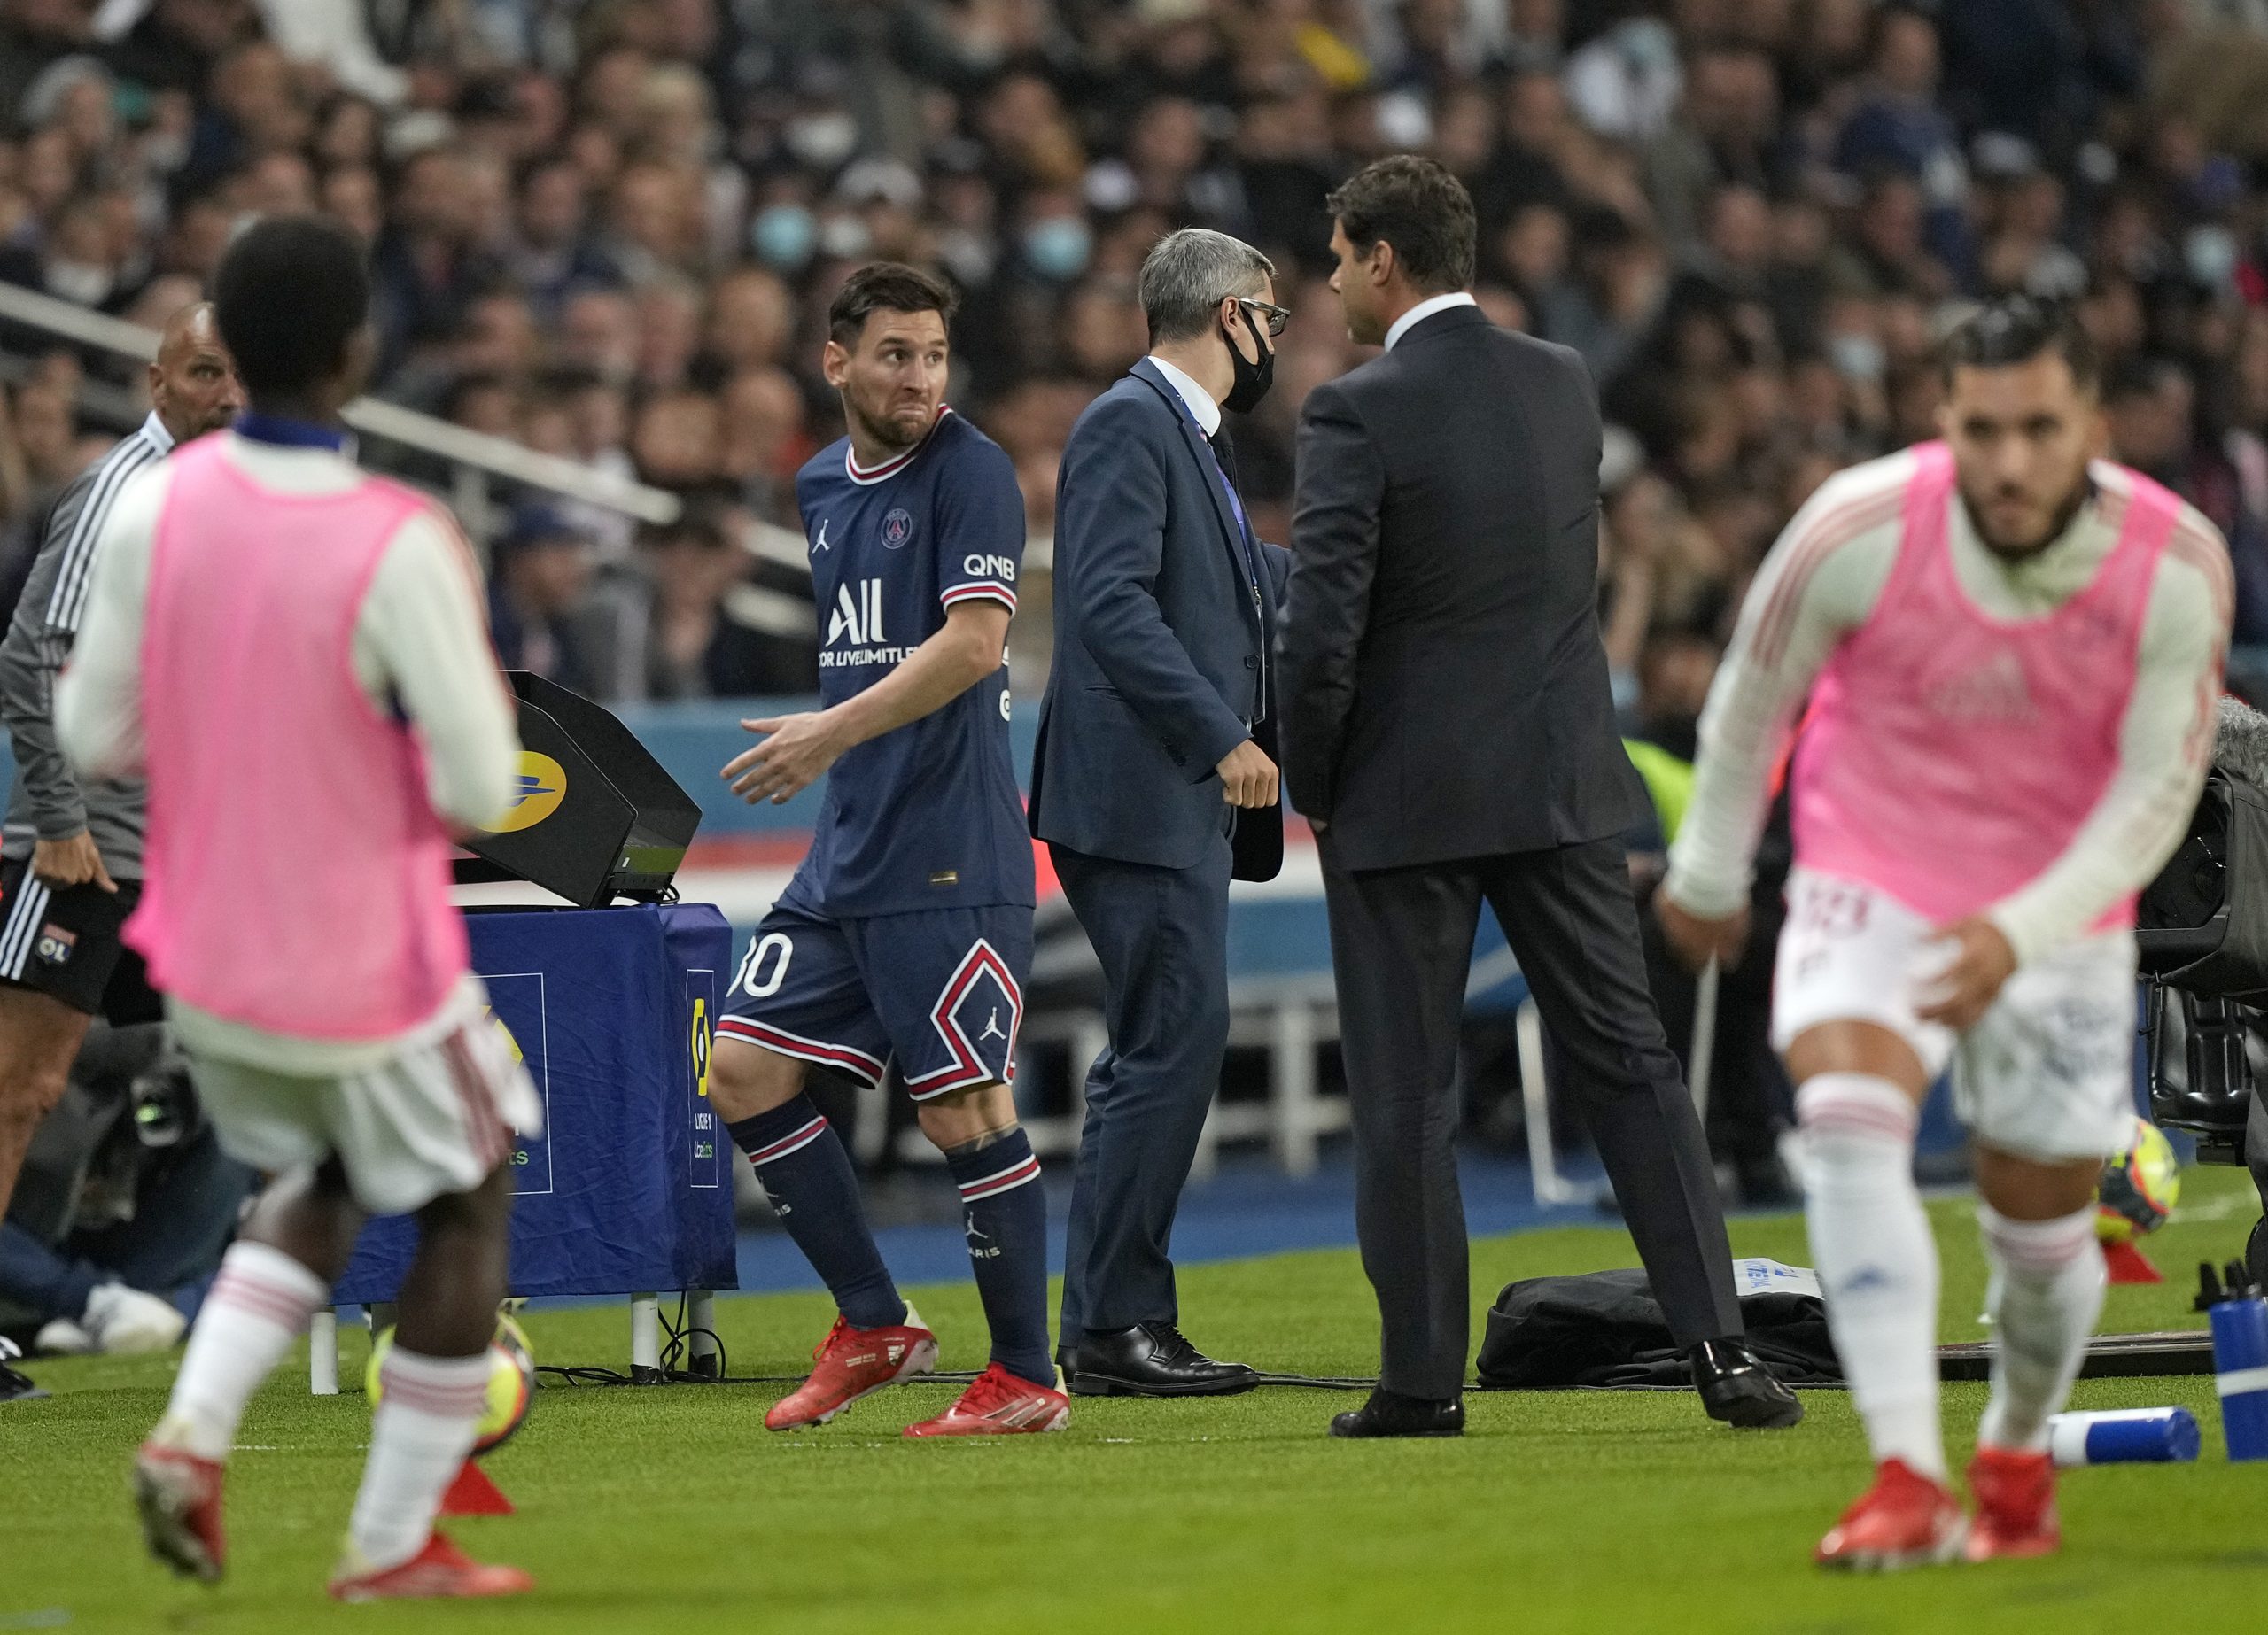 PSG's Lionel Messi looks at PSG's head coach Mauricio Pochettino after he was substituted during the French League One soccer match between Paris Saint-Germain and Lyon at the Parc des Princes in Paris Sunday, Sept. 19, 2021. (AP Photo/Francois Mori)